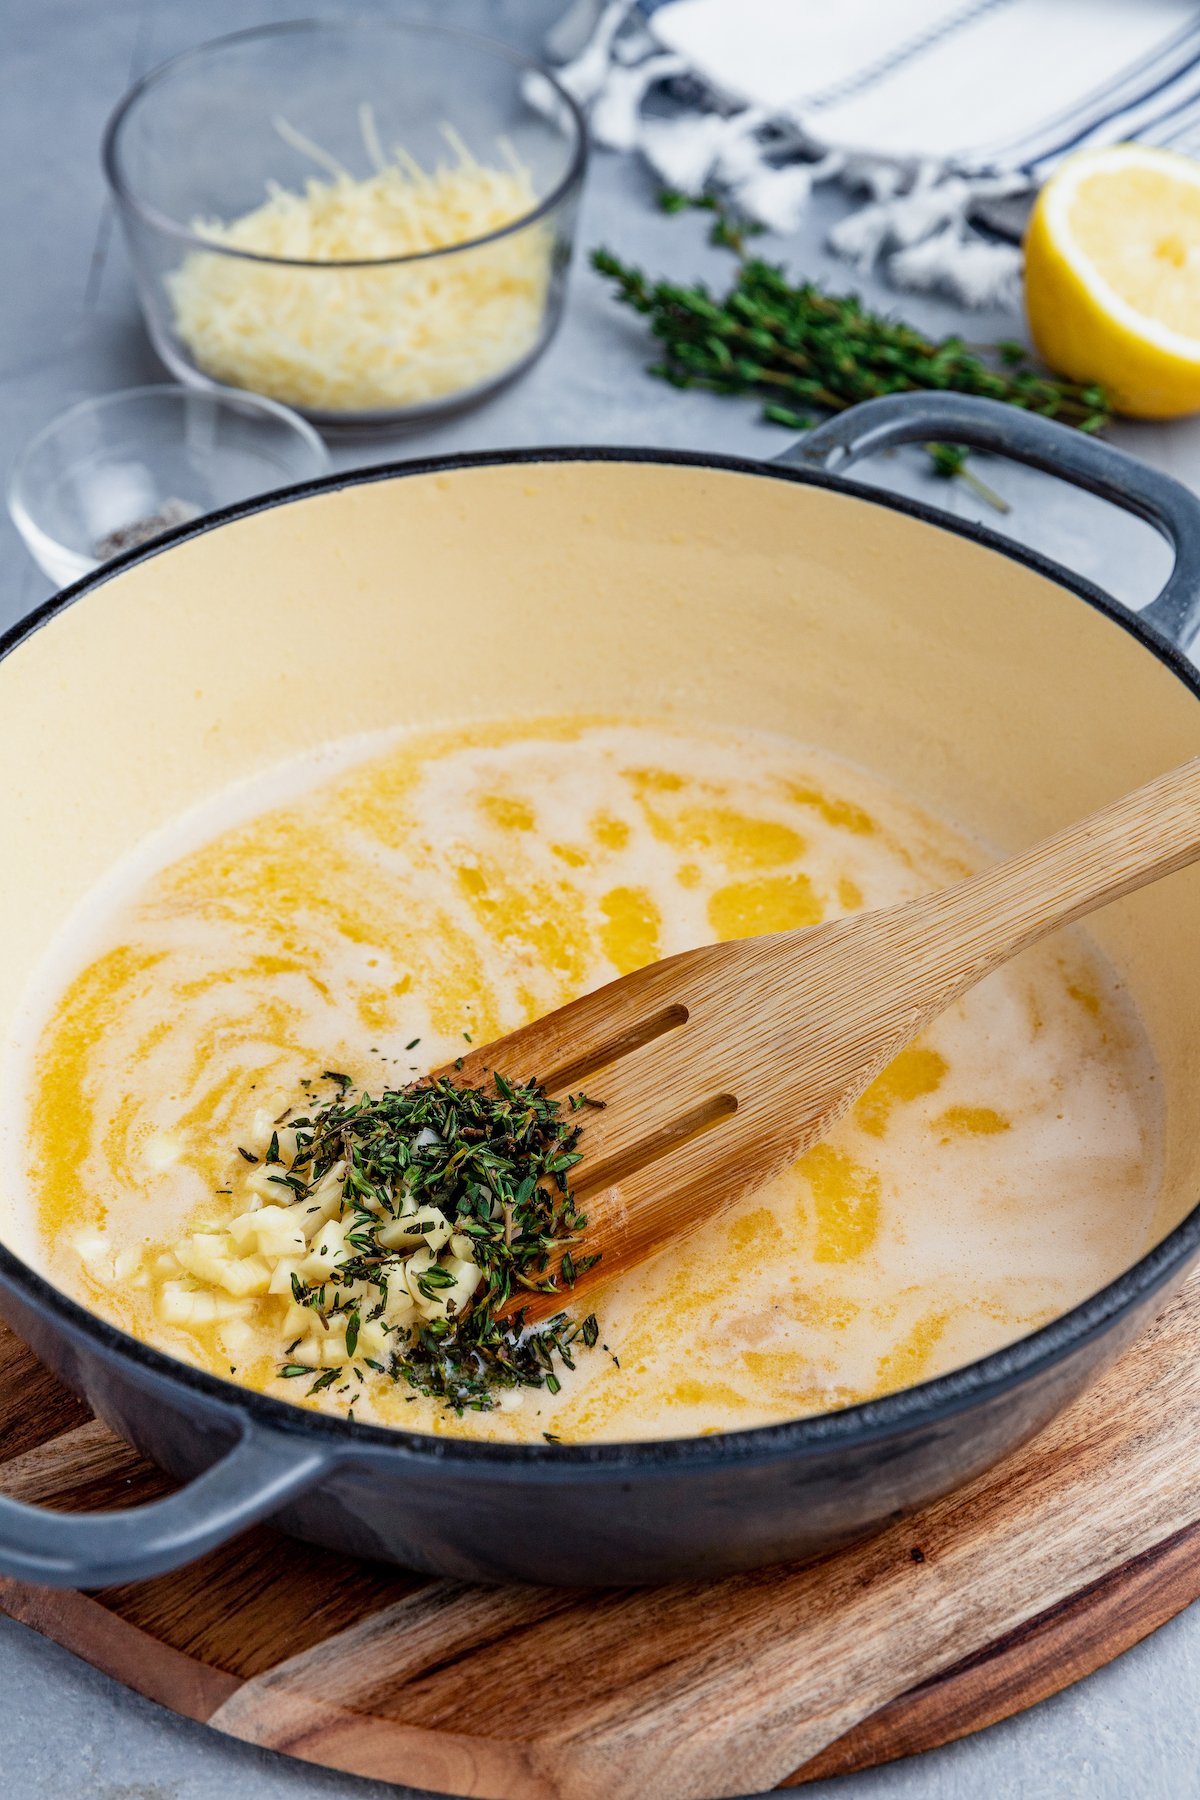 Fresh thyme is added into a skillet with melted butter.